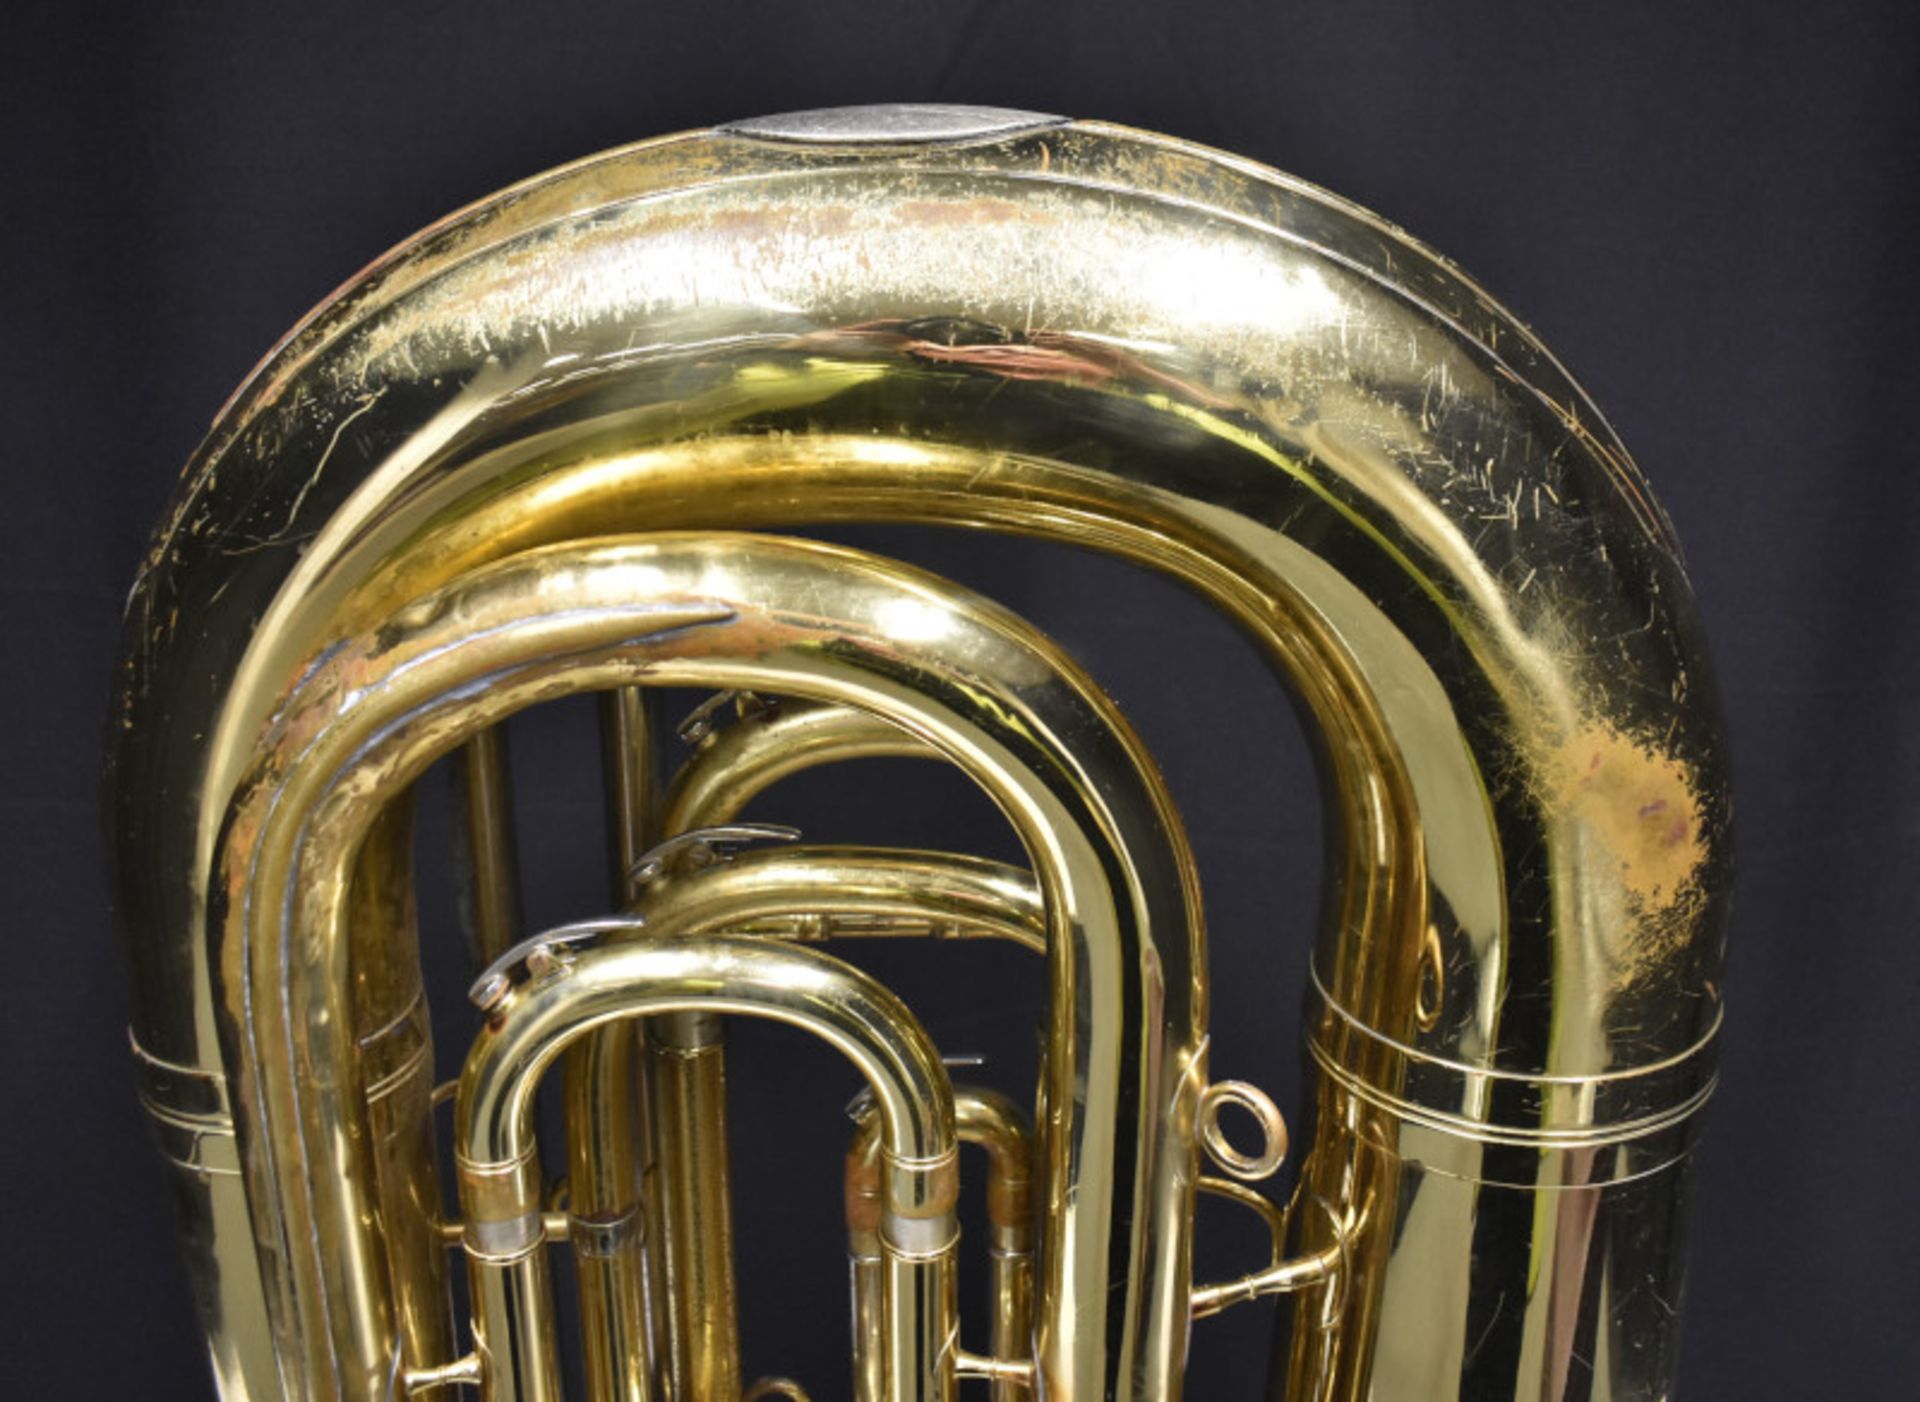 Besson Sovereign BE994 Tuba in Besson Case (case damaged no wheels) - Serial No. 883092 - - Image 9 of 21